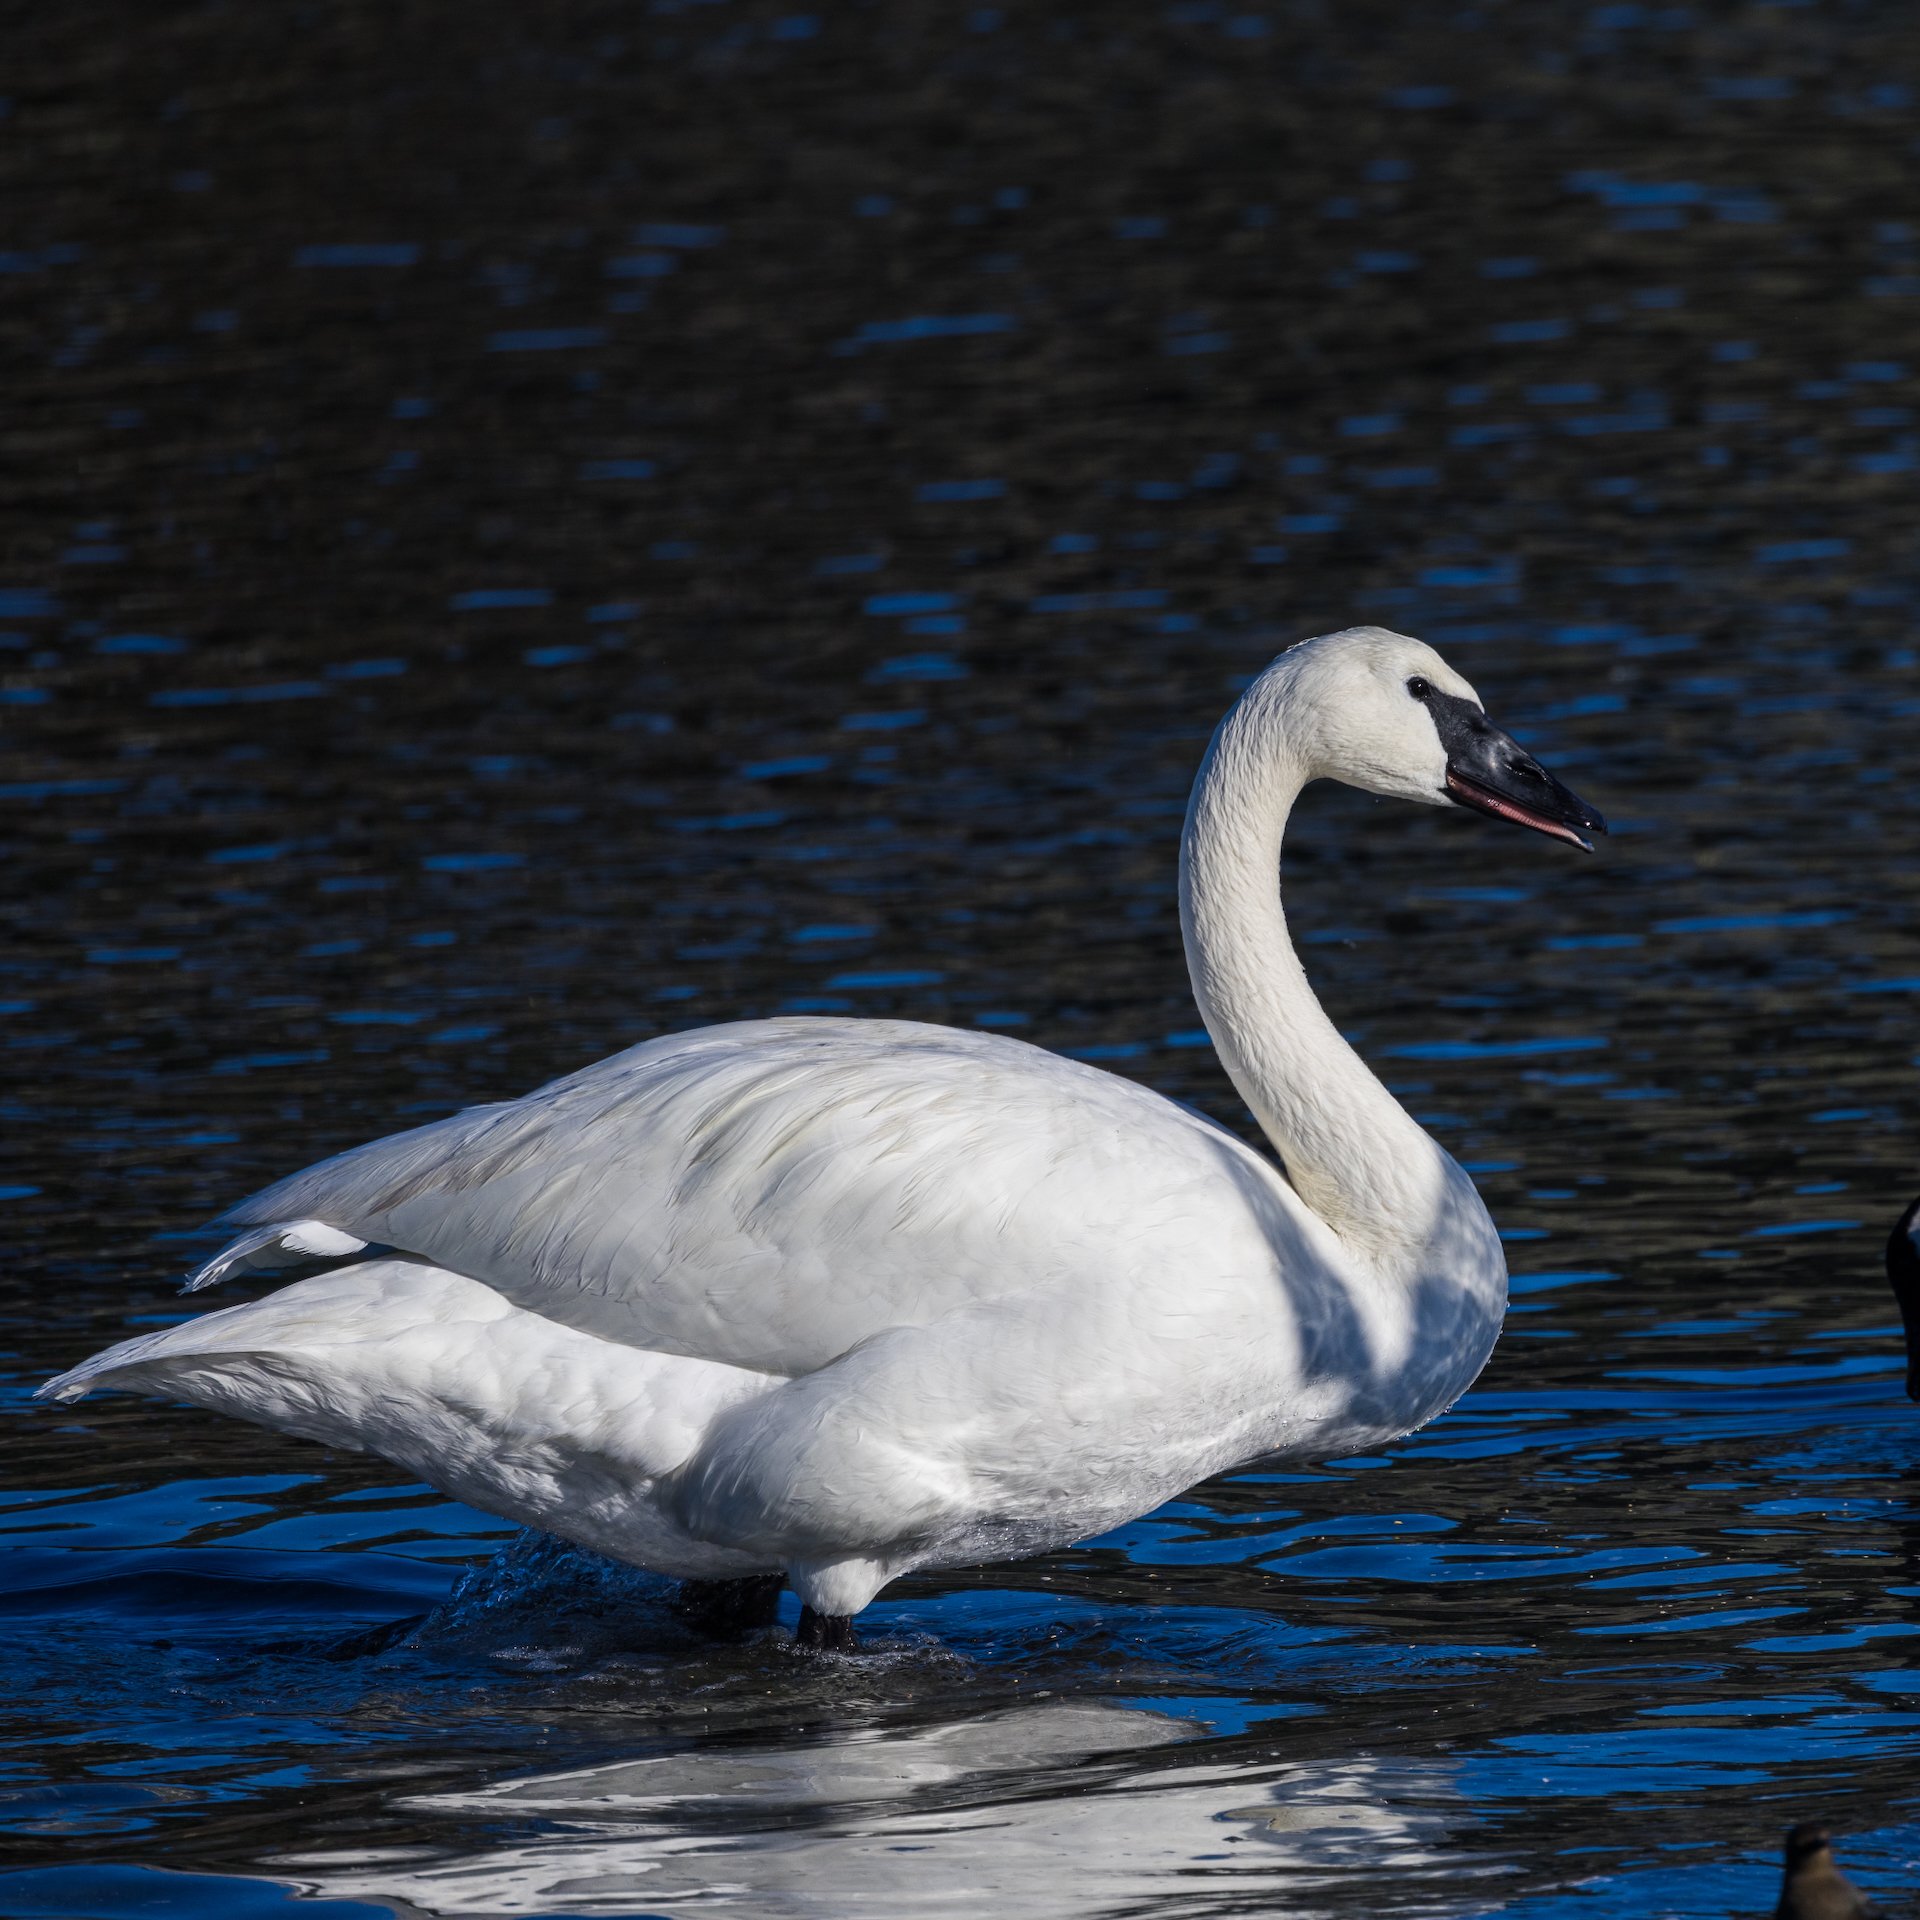  I believe this is a lone trumpeter swan, who seemed pretty used to people and was looking for handouts.  